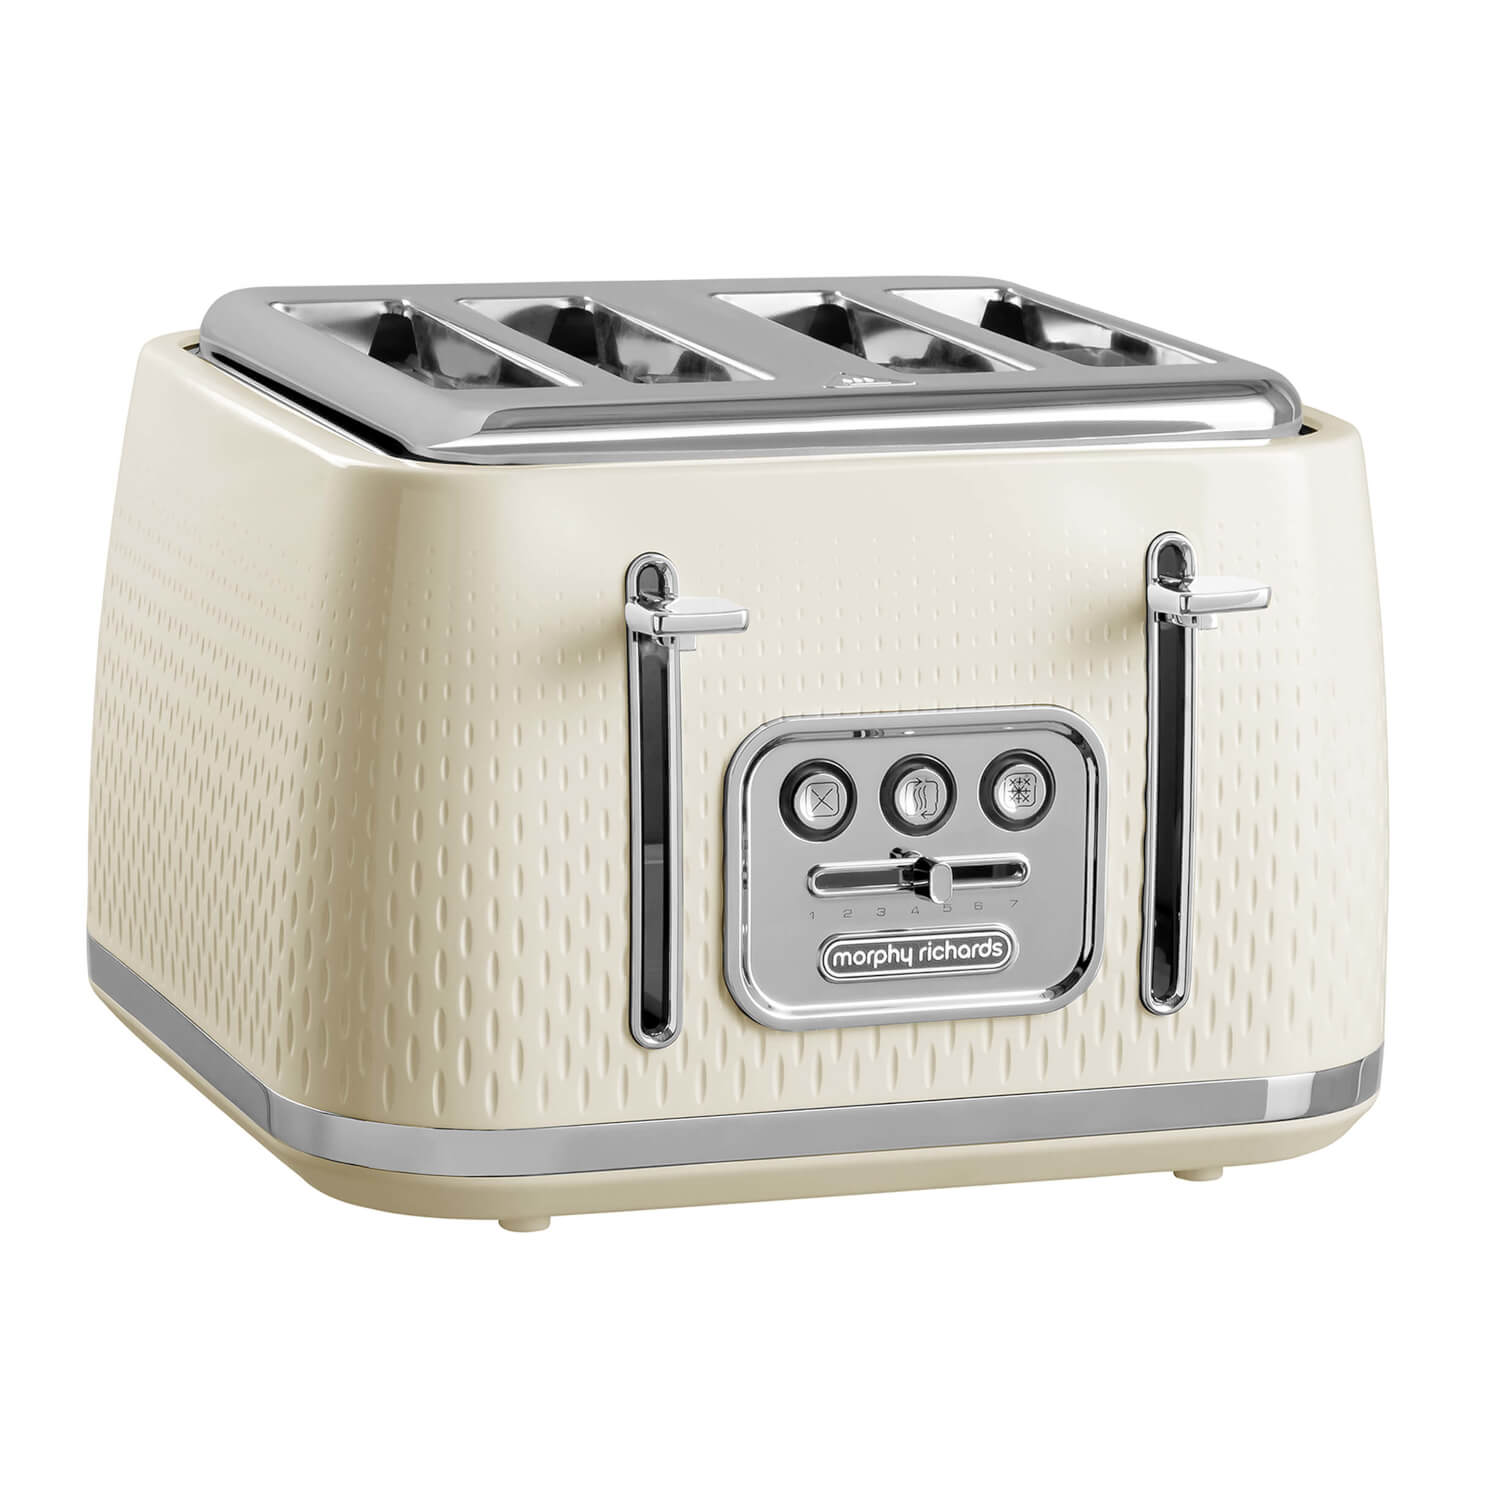 Morphy Richards Verve 4-Slice Toaster - Cream | 243011 1 Shaws Department Stores